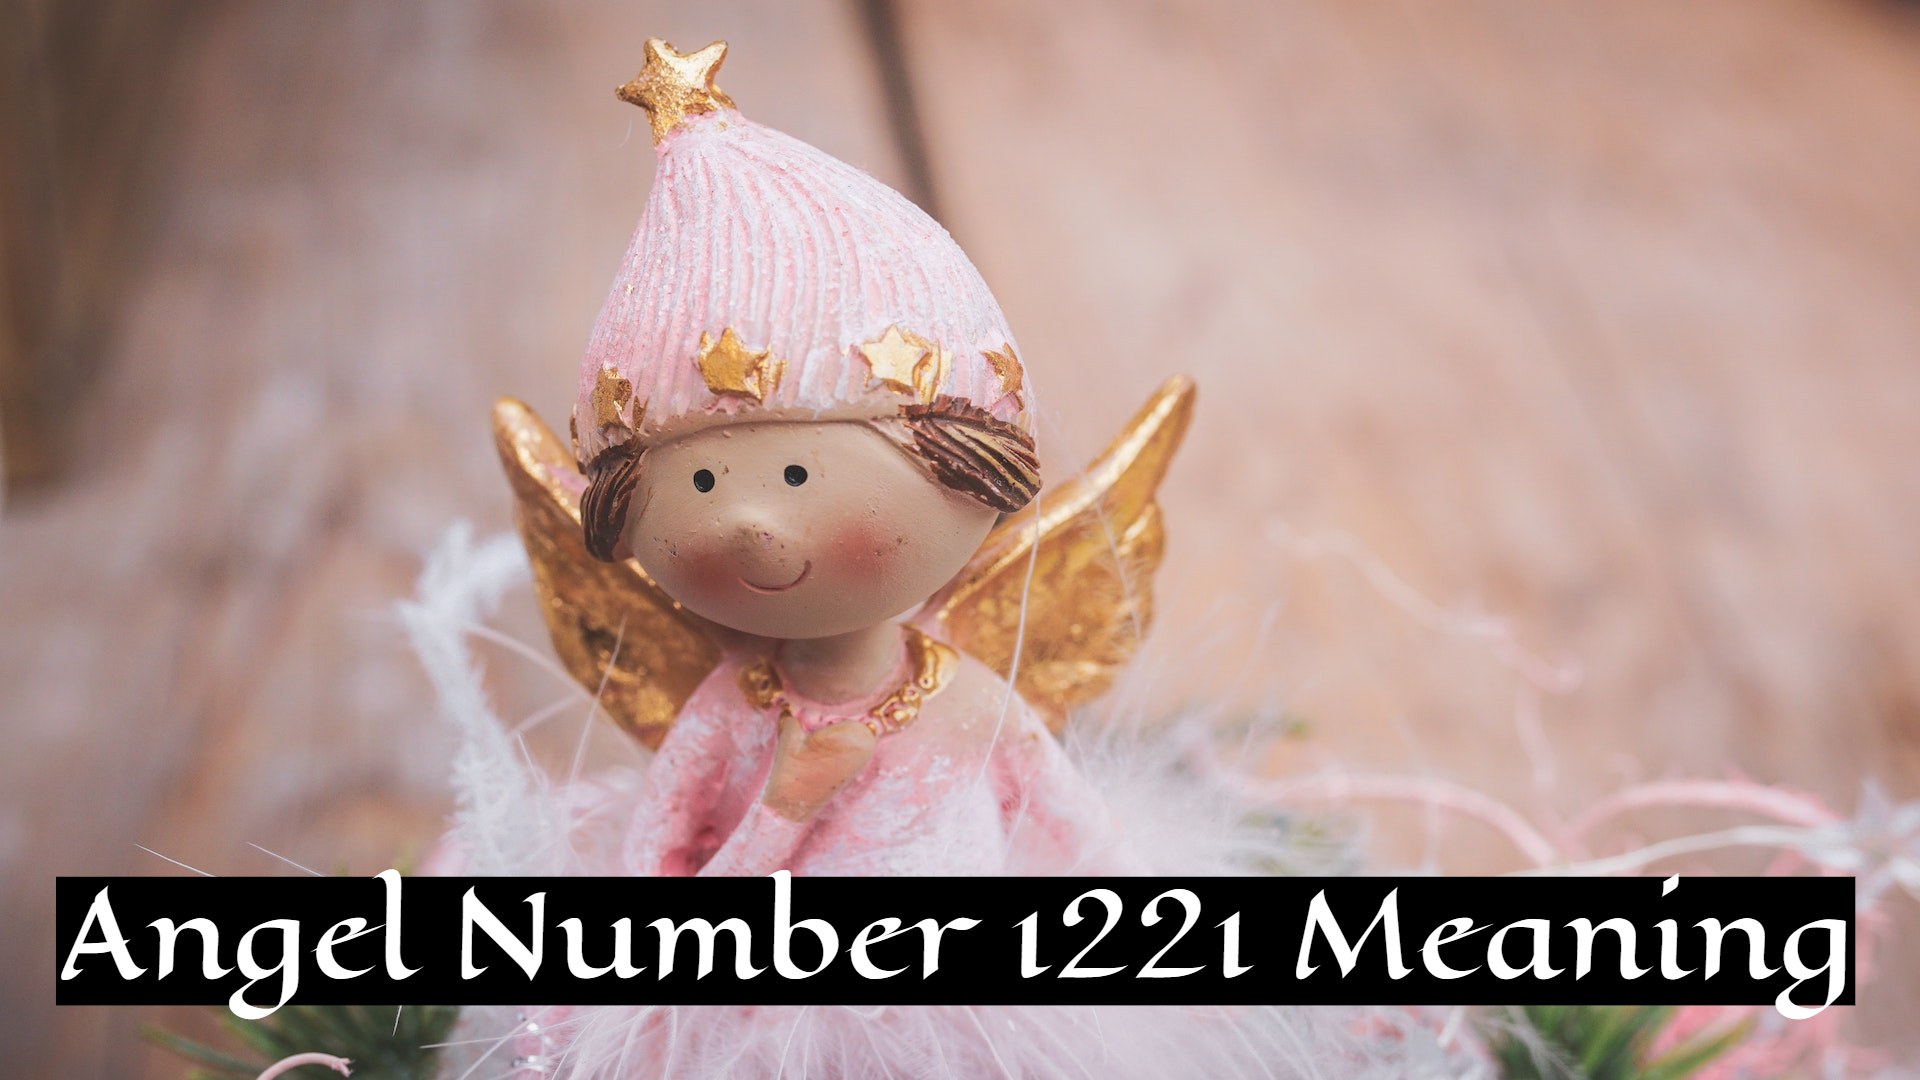 Angel Number 1221 Meaning - Symbolism And Spiritual Significance